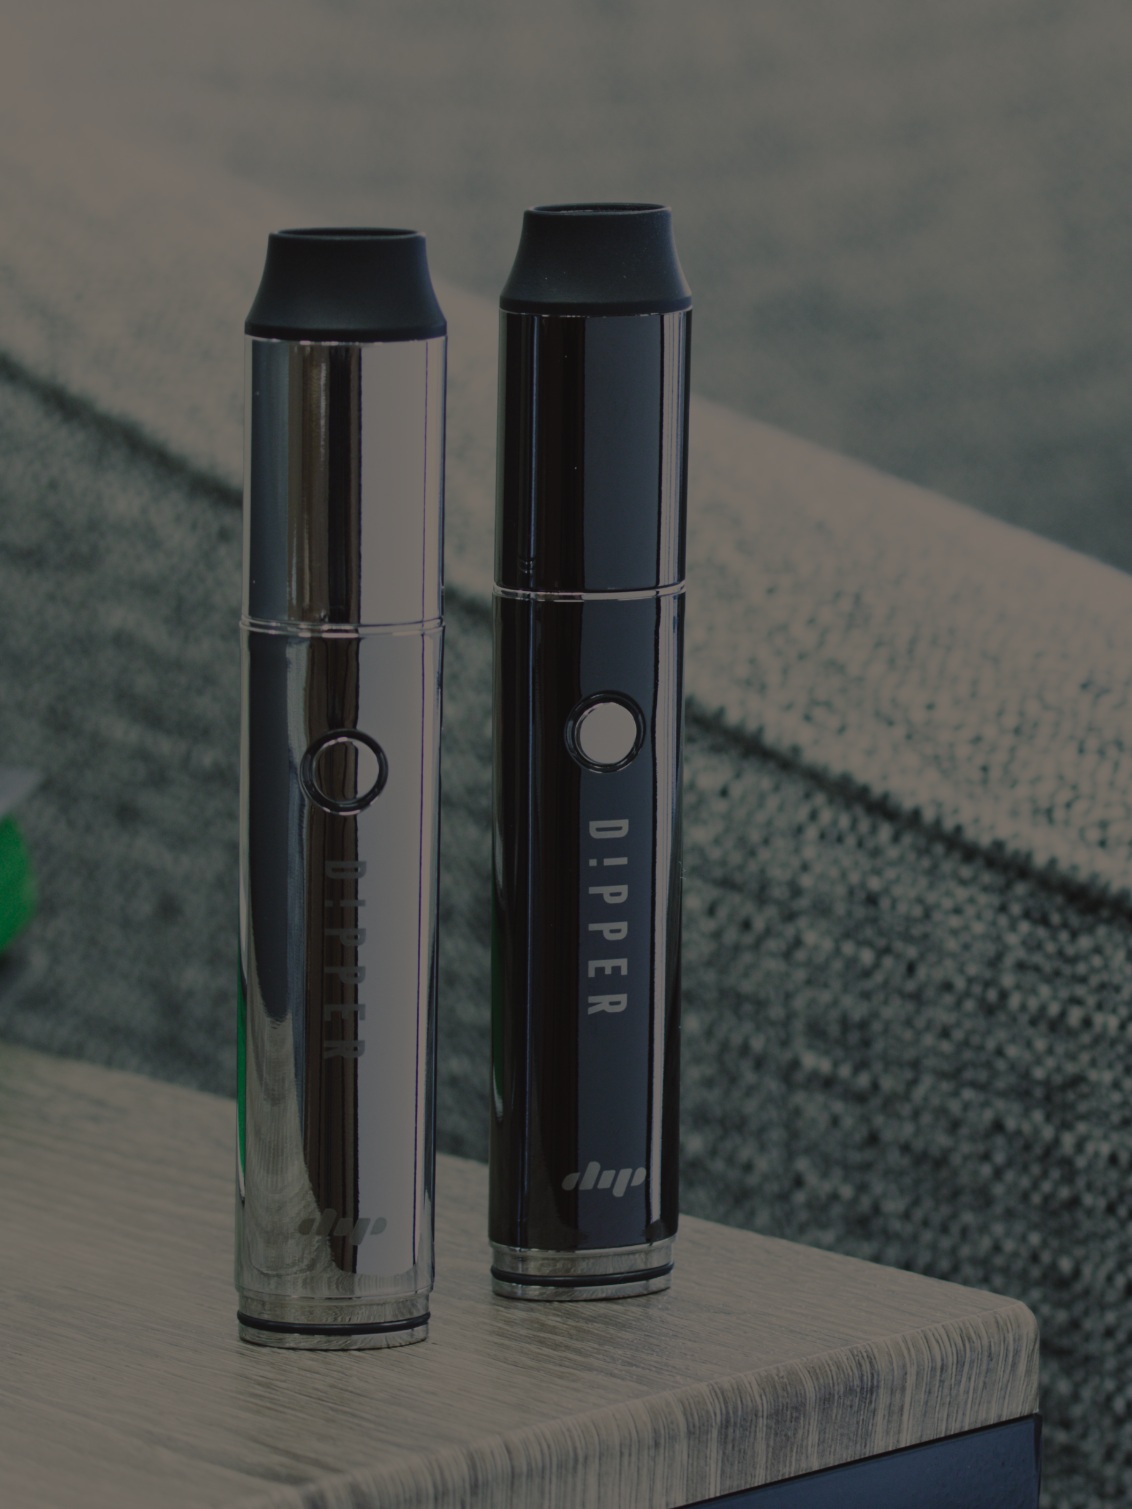 Dab Pens For Wax, Dabs, Crumble & - Officialvapehoneystick